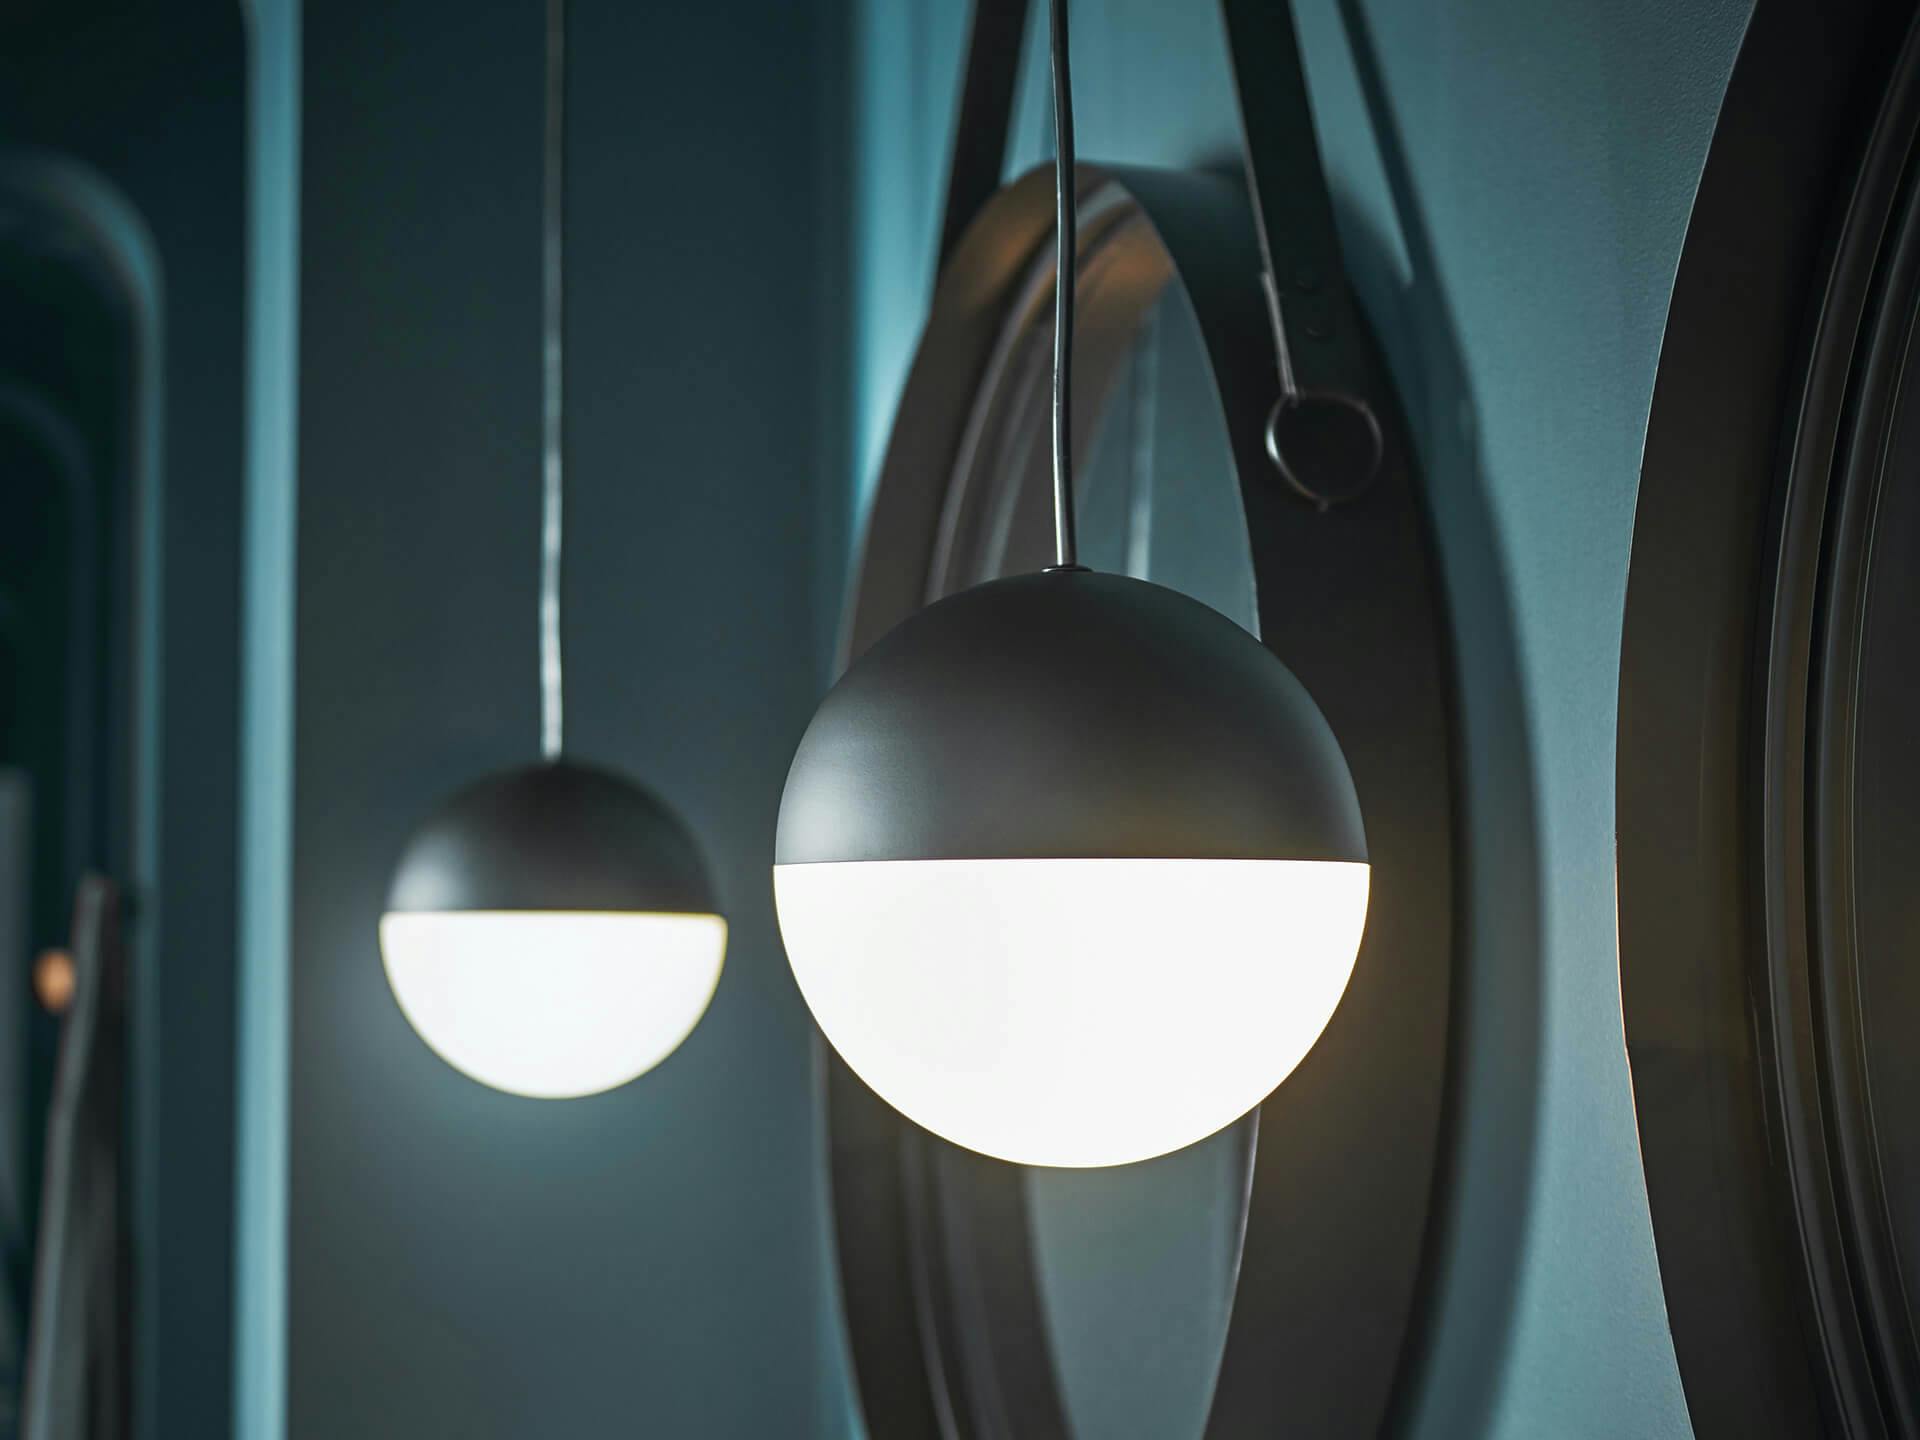 Bathroom at night with a close up on two moonlit black finish pendants in front of two round mirrors